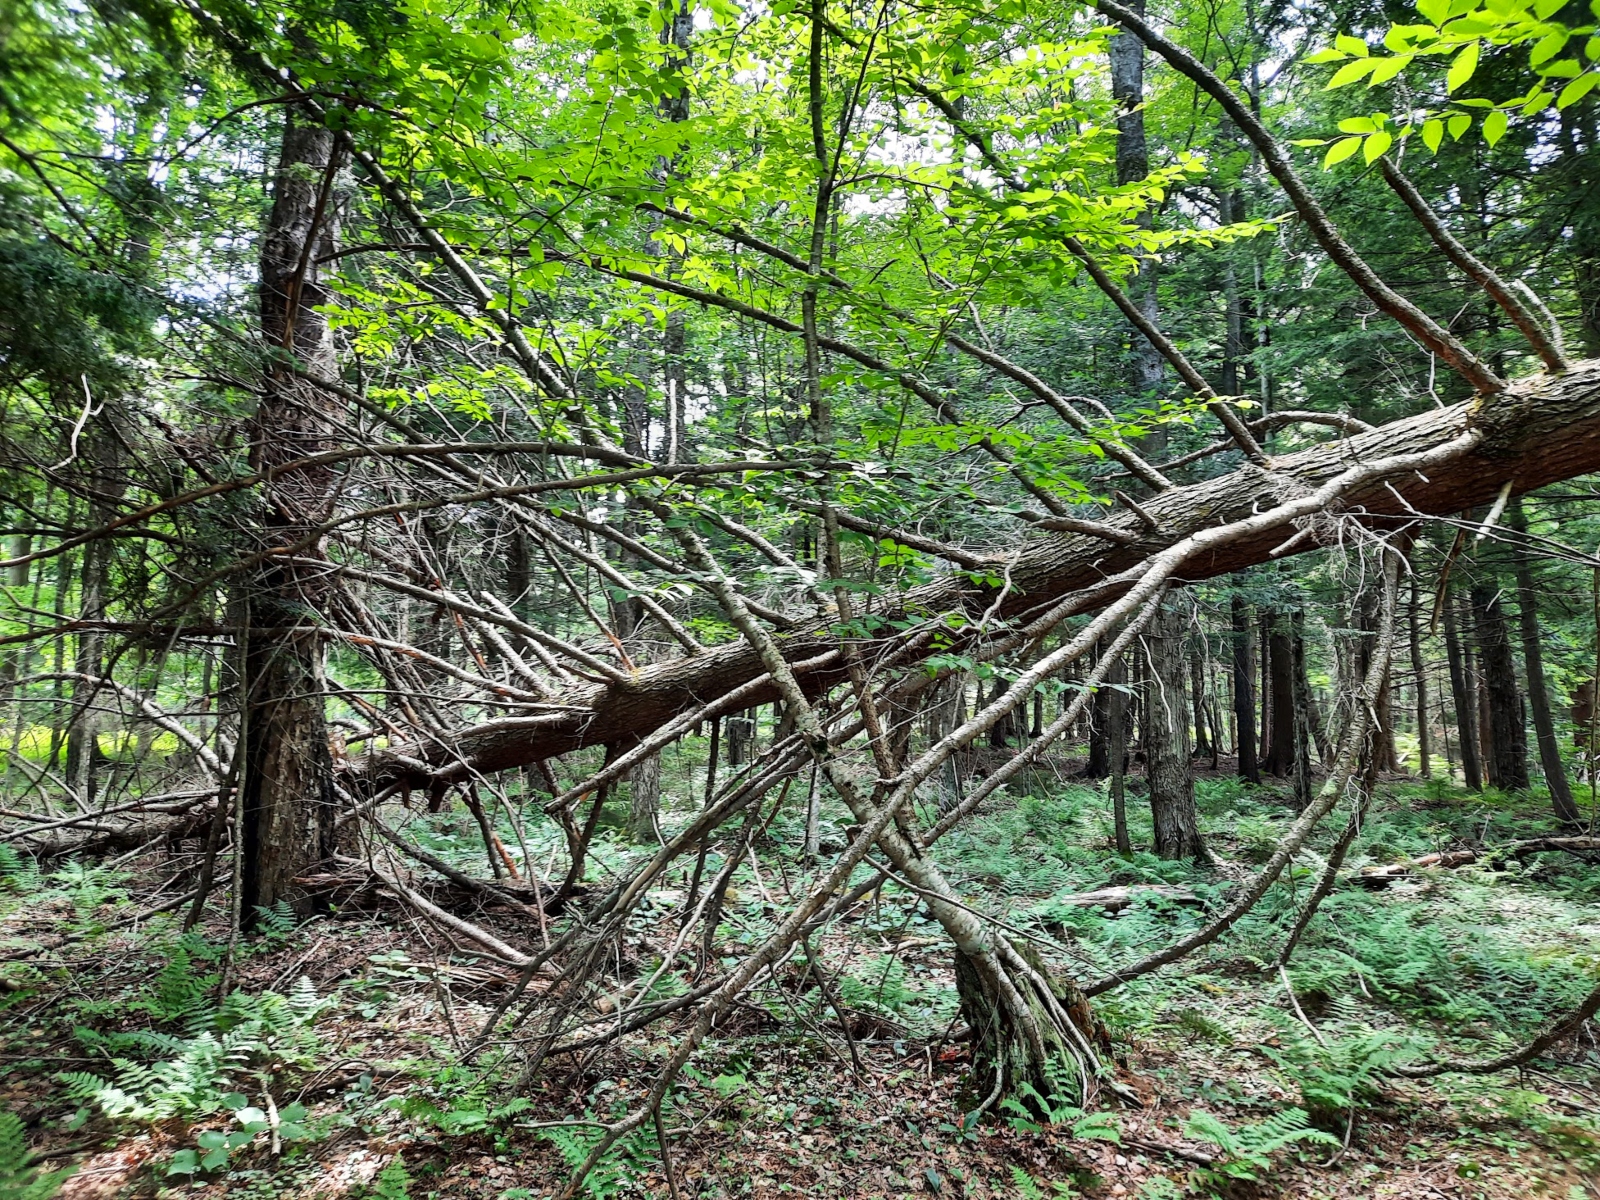 A fallen tree at an angle in the middle of the woods.